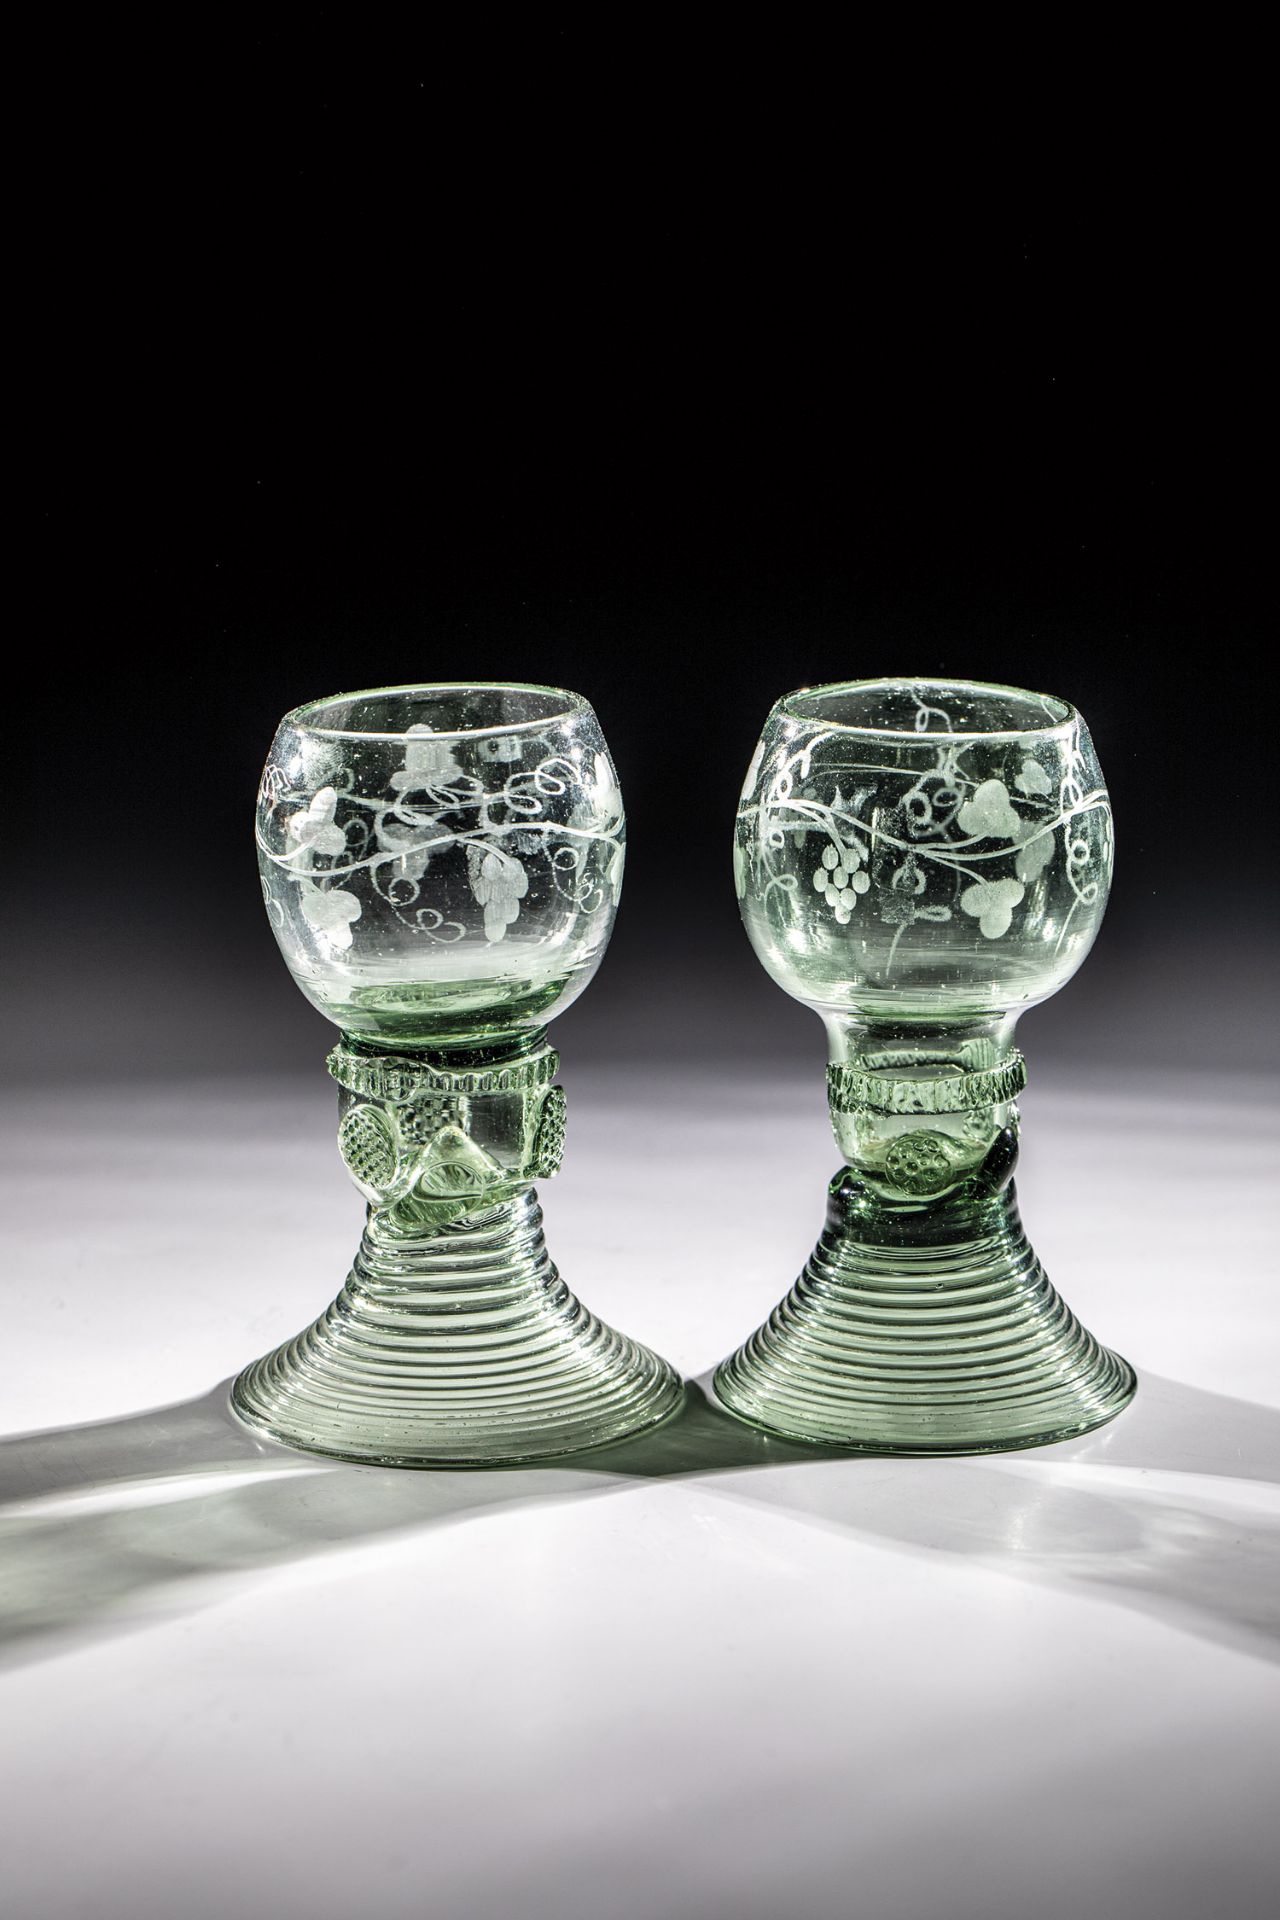 Two Romans with wine decor Germany, 18th century Light green glass with demolition. Raised, spun